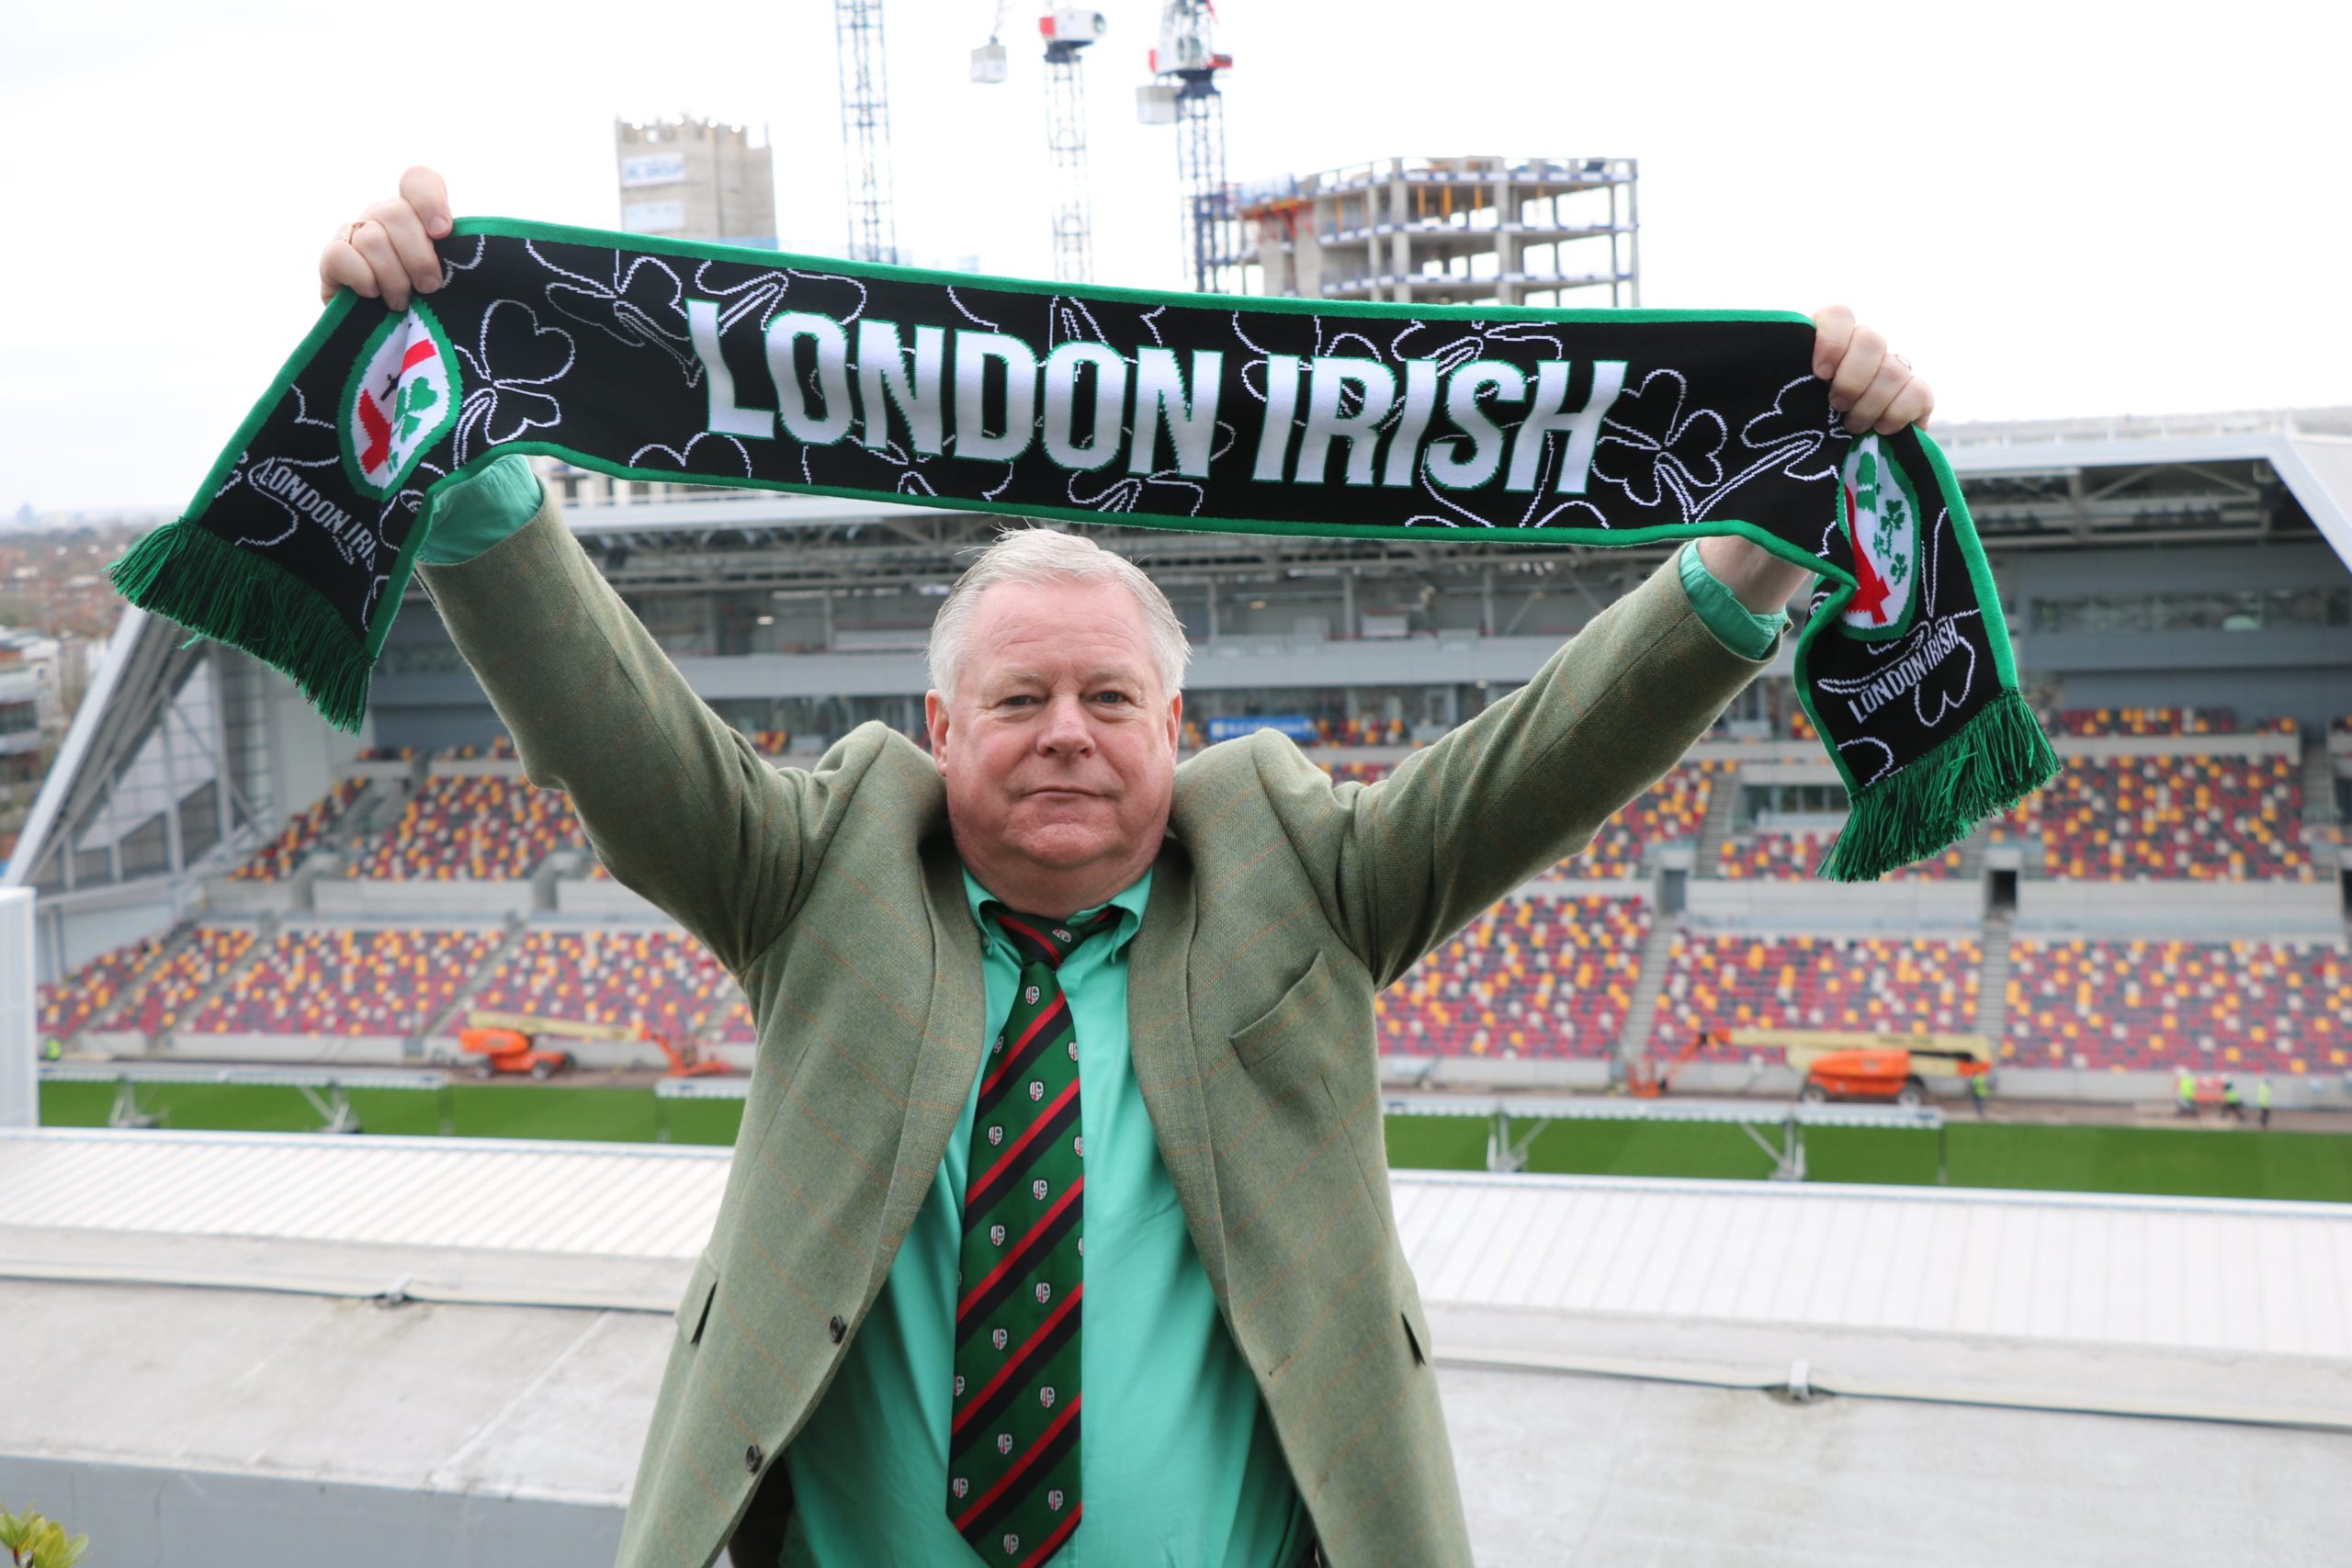 "£3.6m" - London Irish owner rejected 'two to three offers' prior to clubs collapse - Ruck